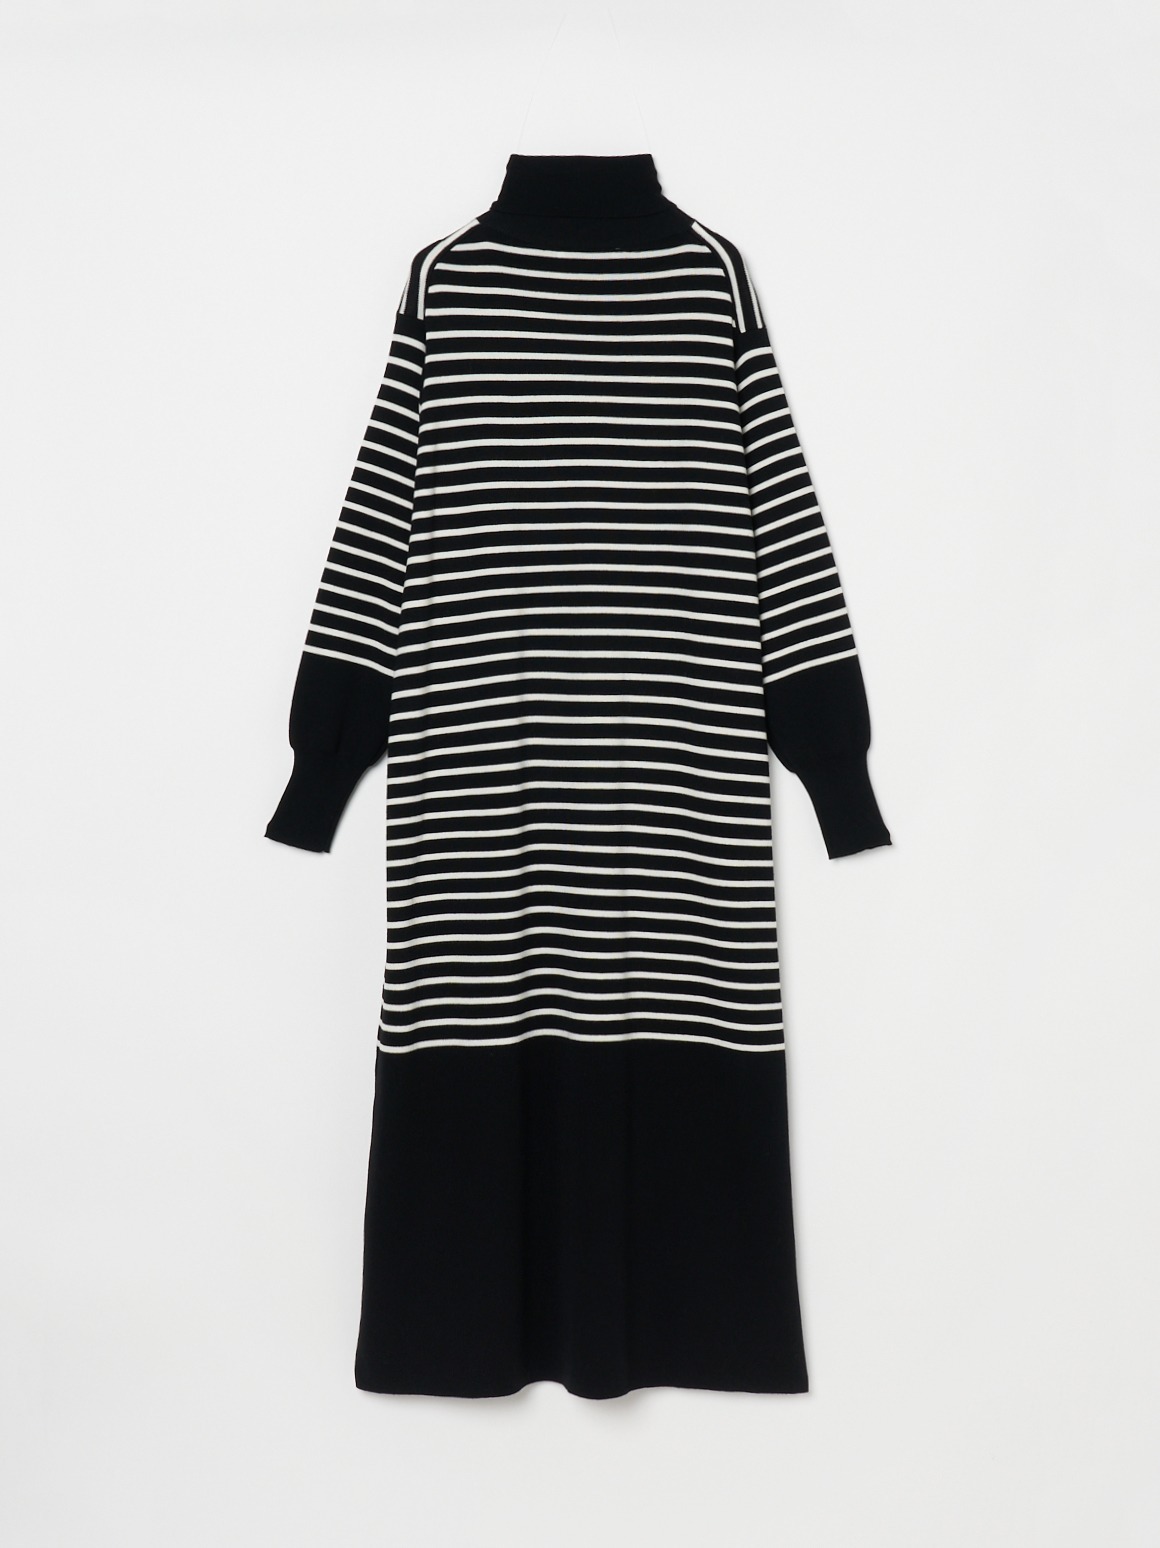 Wool outfit dress 詳細画像 black/off white 1